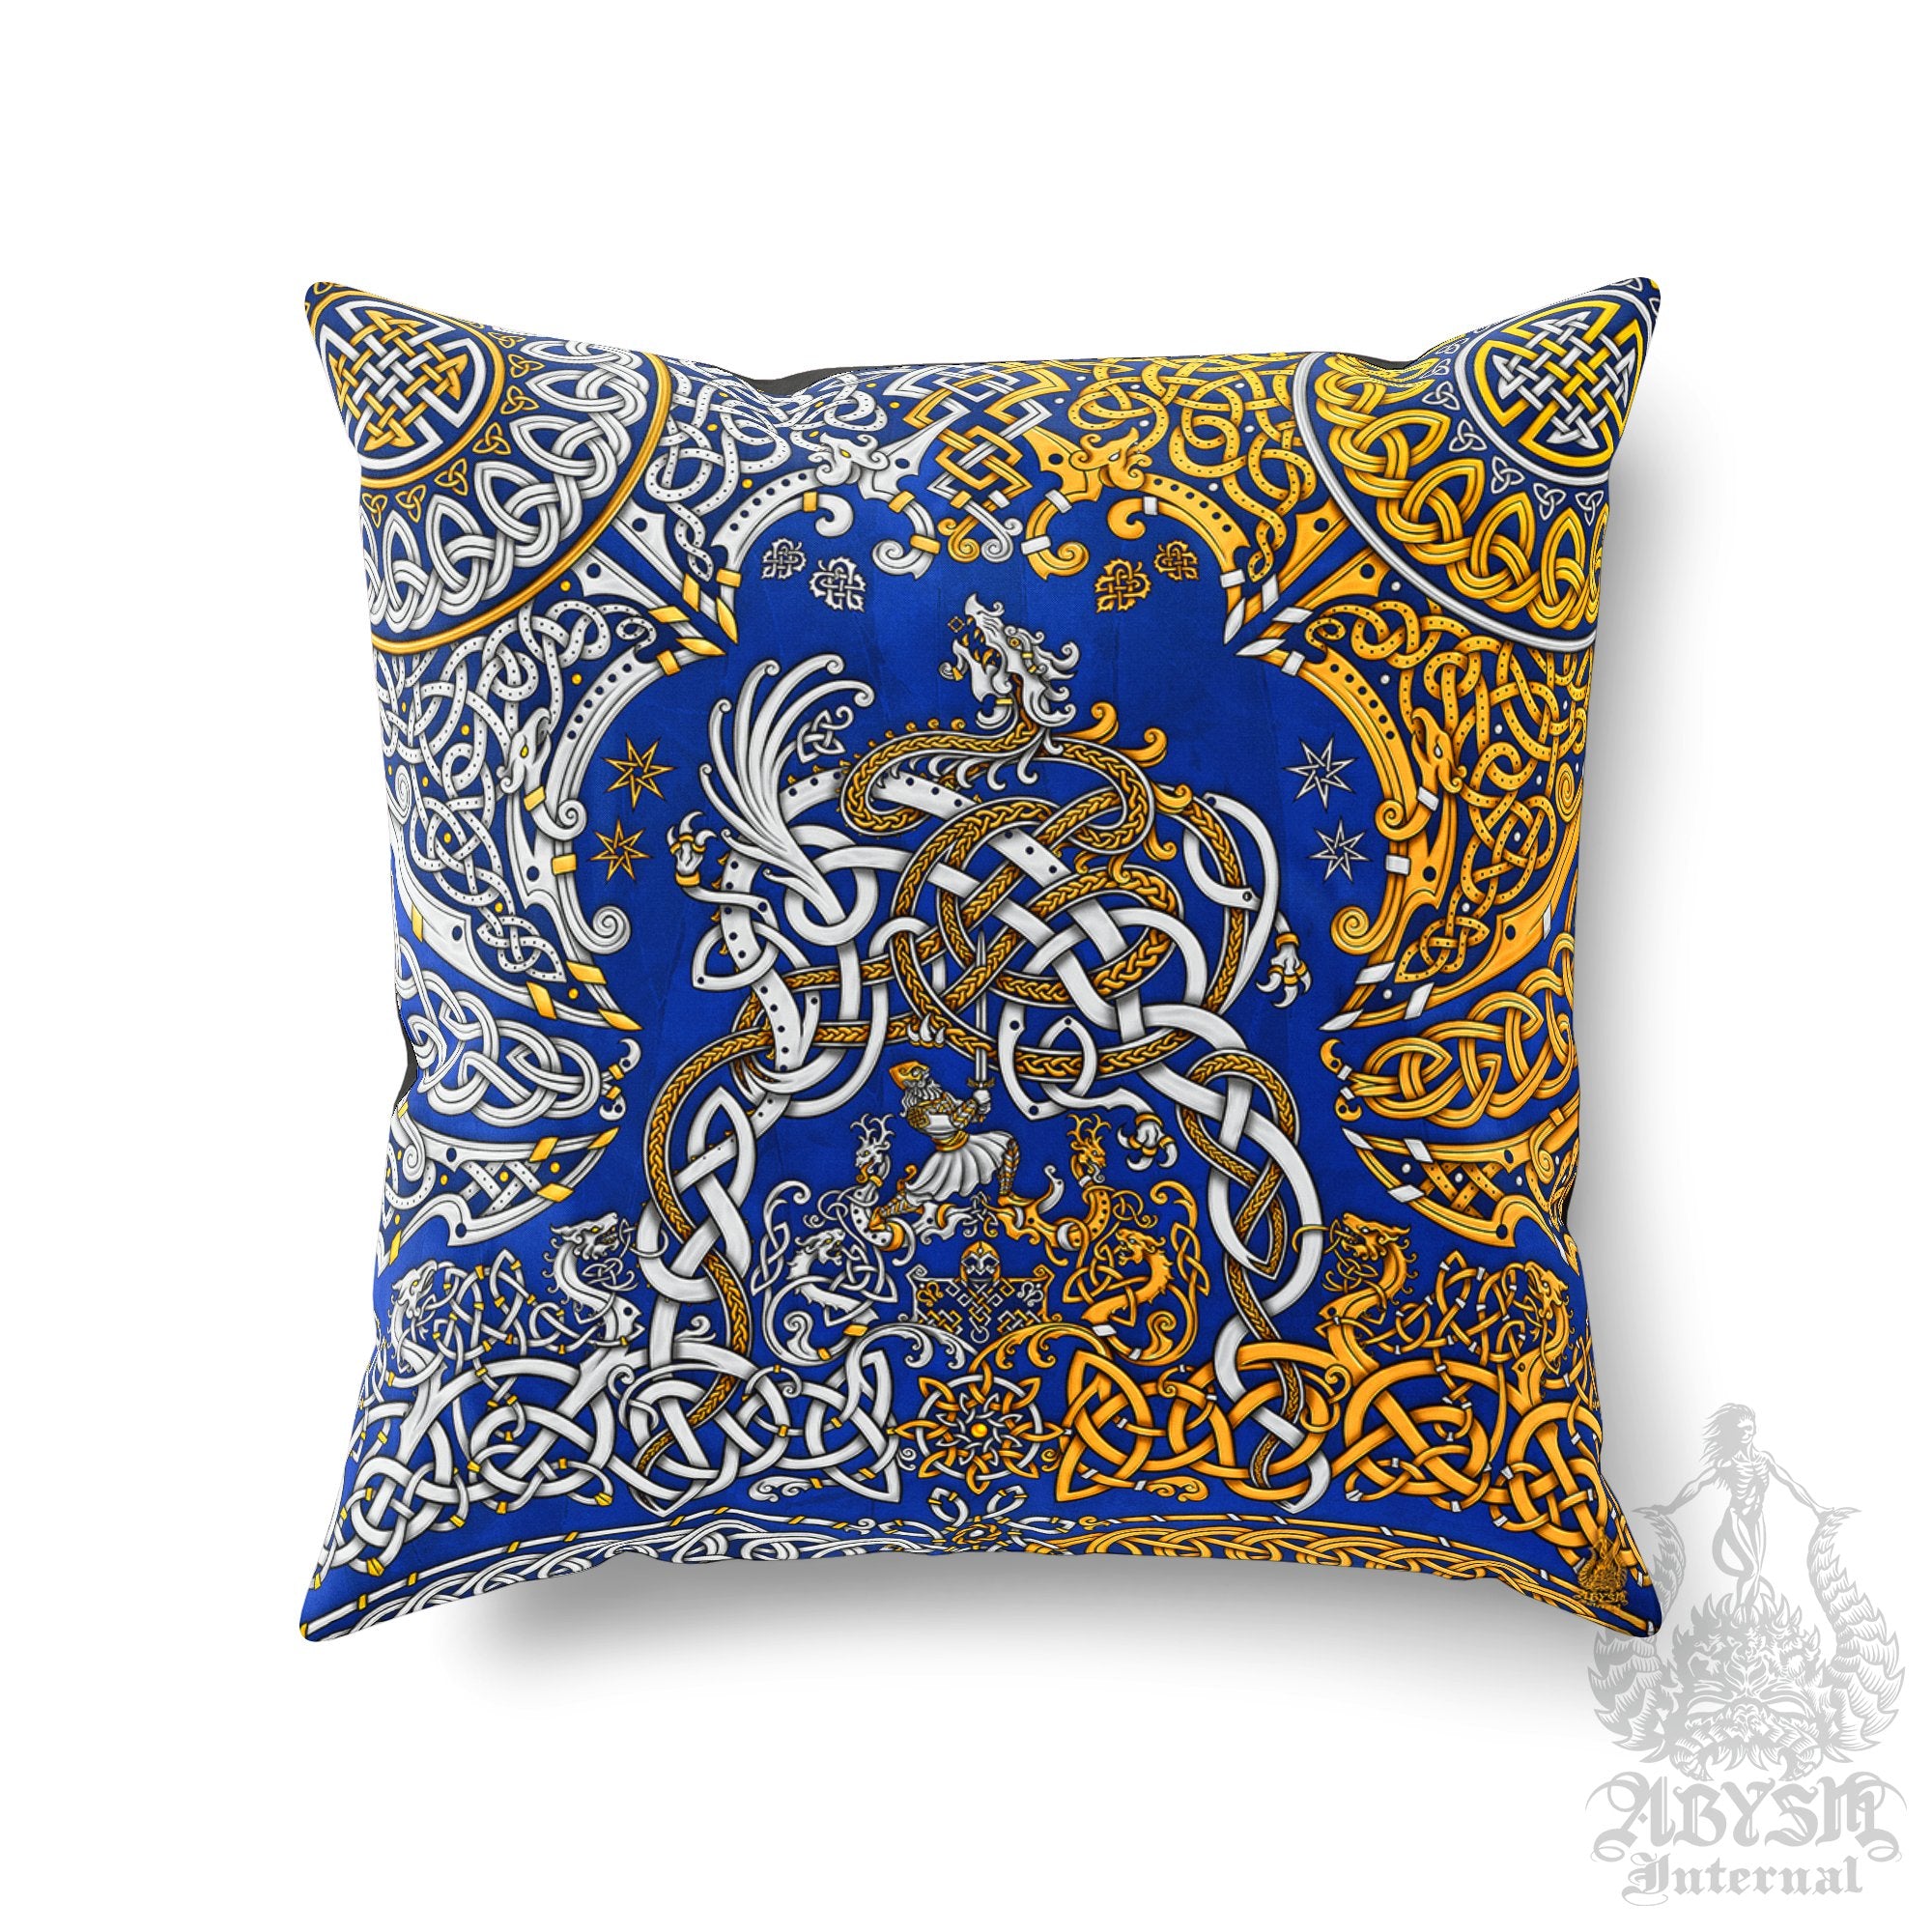 Norse Throw Pillow, Decorative Accent Pillow, Square Cushion Cover, Viking Room Decor, Dragon Fafnir, Nordic Art, Alternative Home - Gold & 3 Colors - Abysm Internal